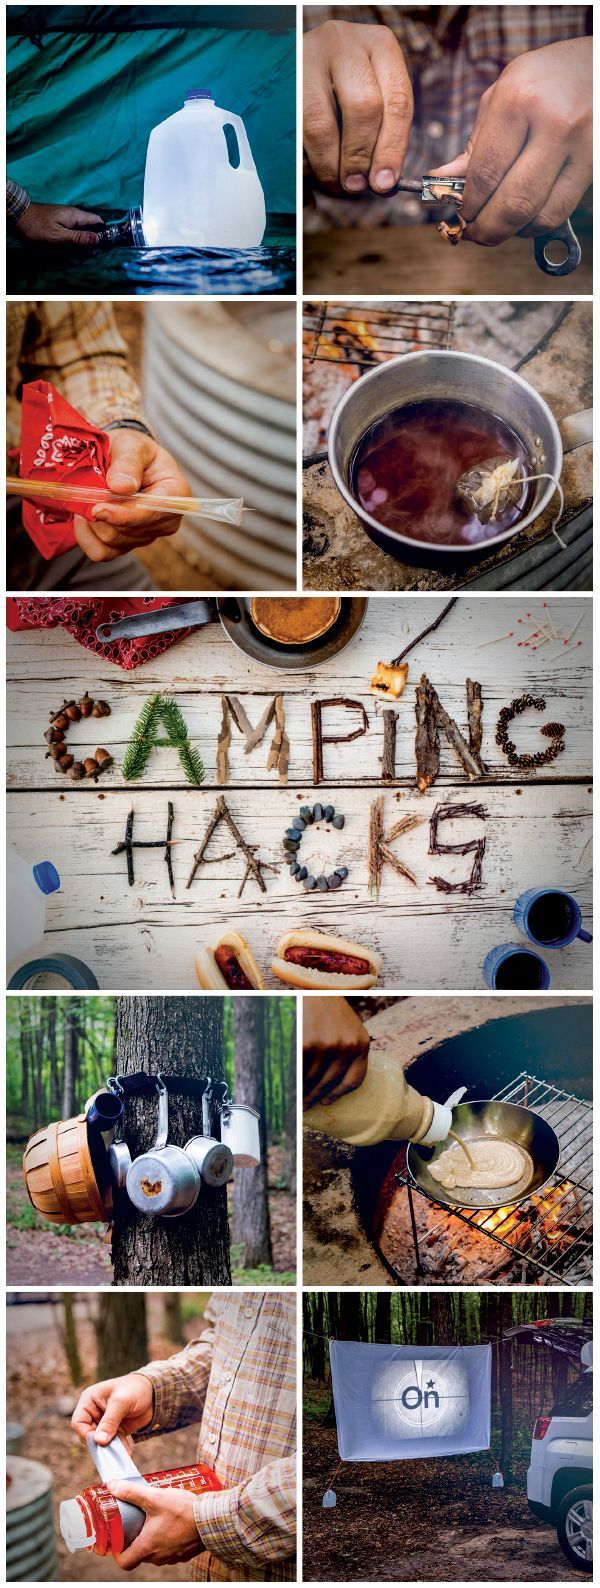 #Camping #tips and tricks that will change the way you #camp forever! See them